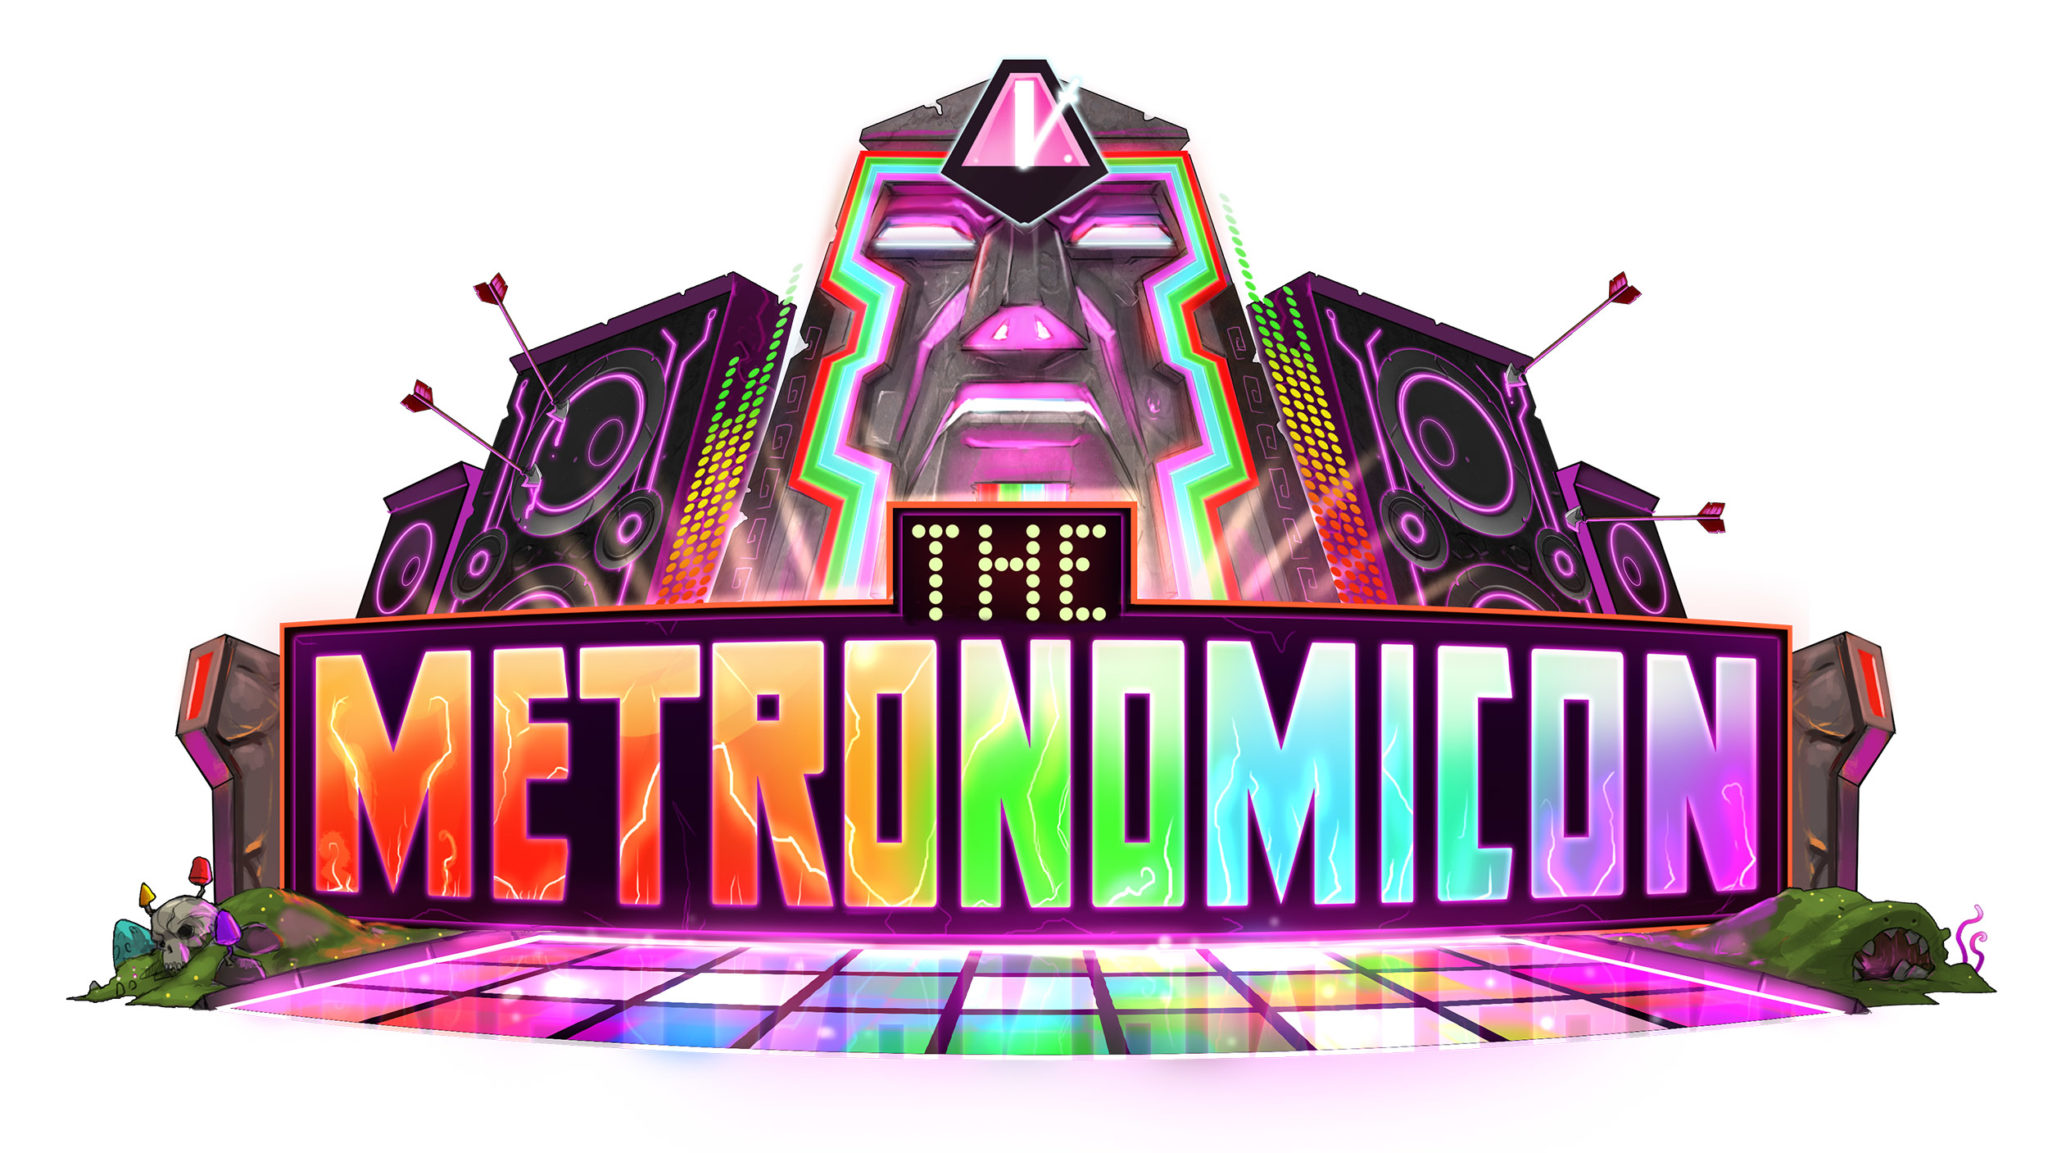 The Metronomicon instal the new